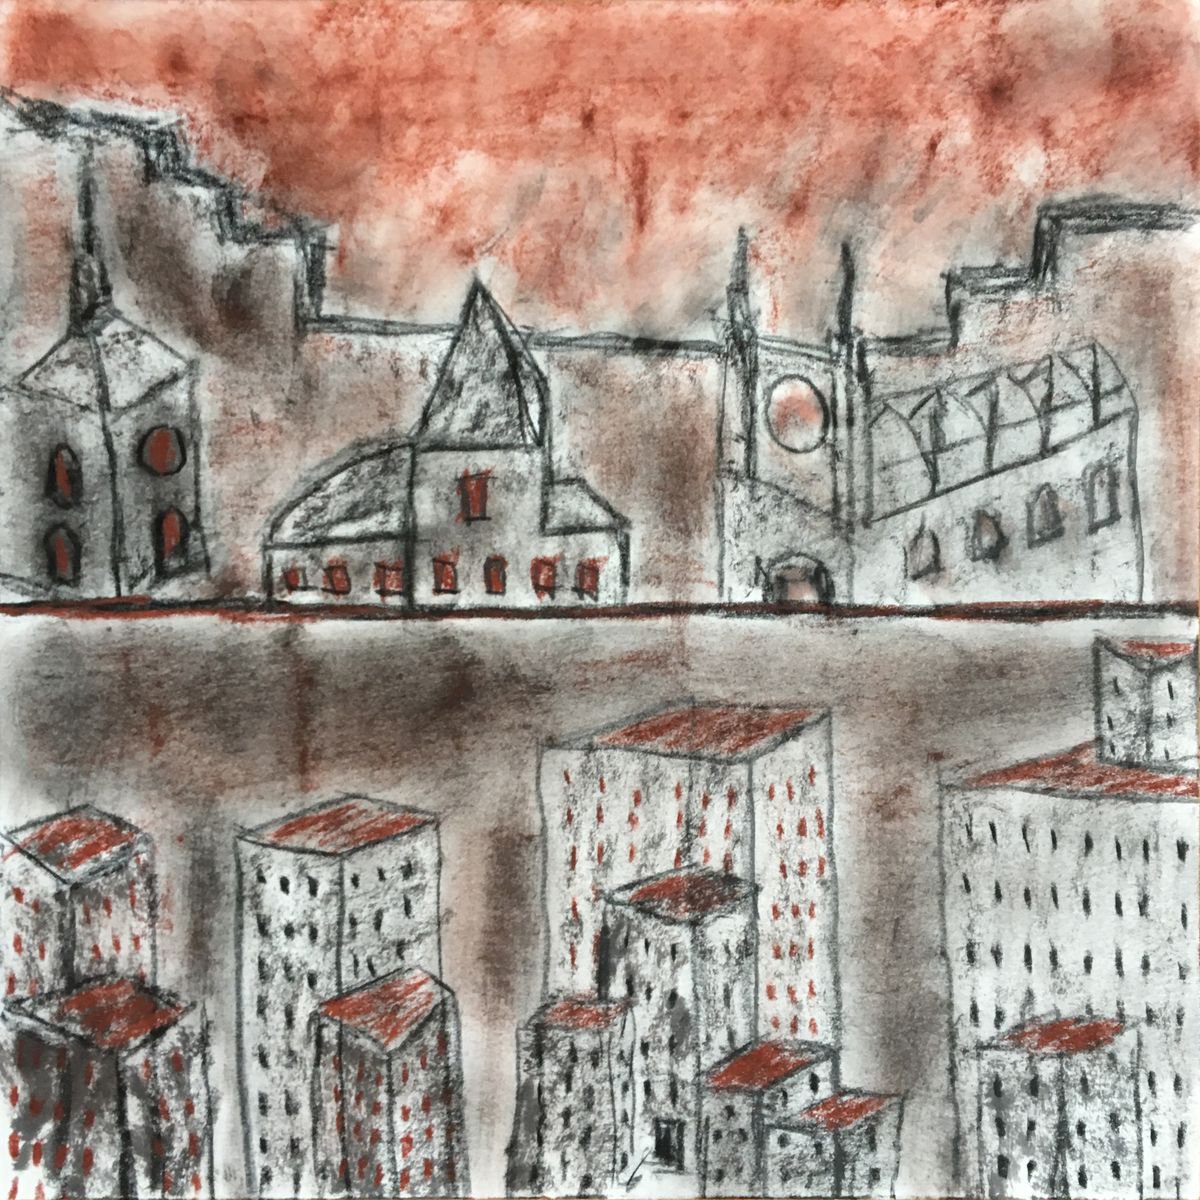 Town III (30x30 cm) by Paola Consonni